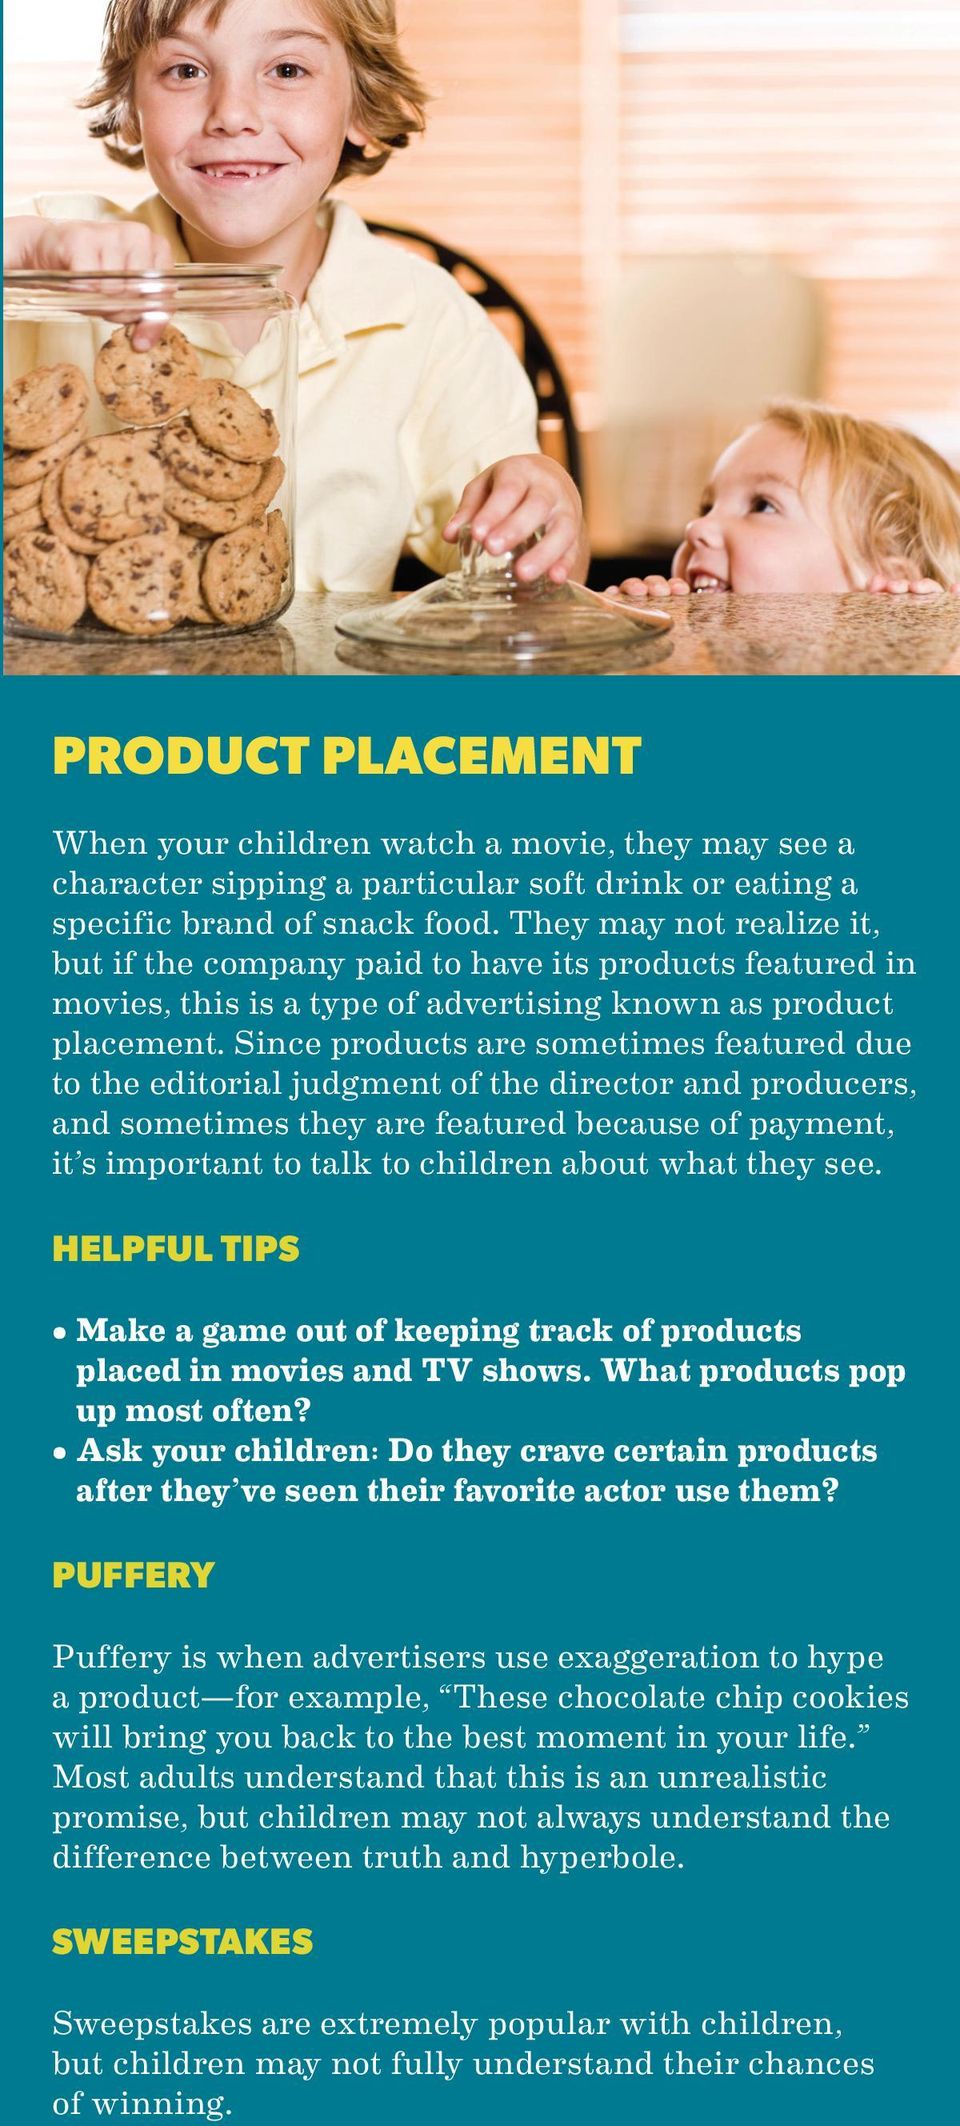 Since products are sometimes featured due to the editorial judgment of the director and producers, and sometimes they are featured because of payment, it s important to talk to children about what